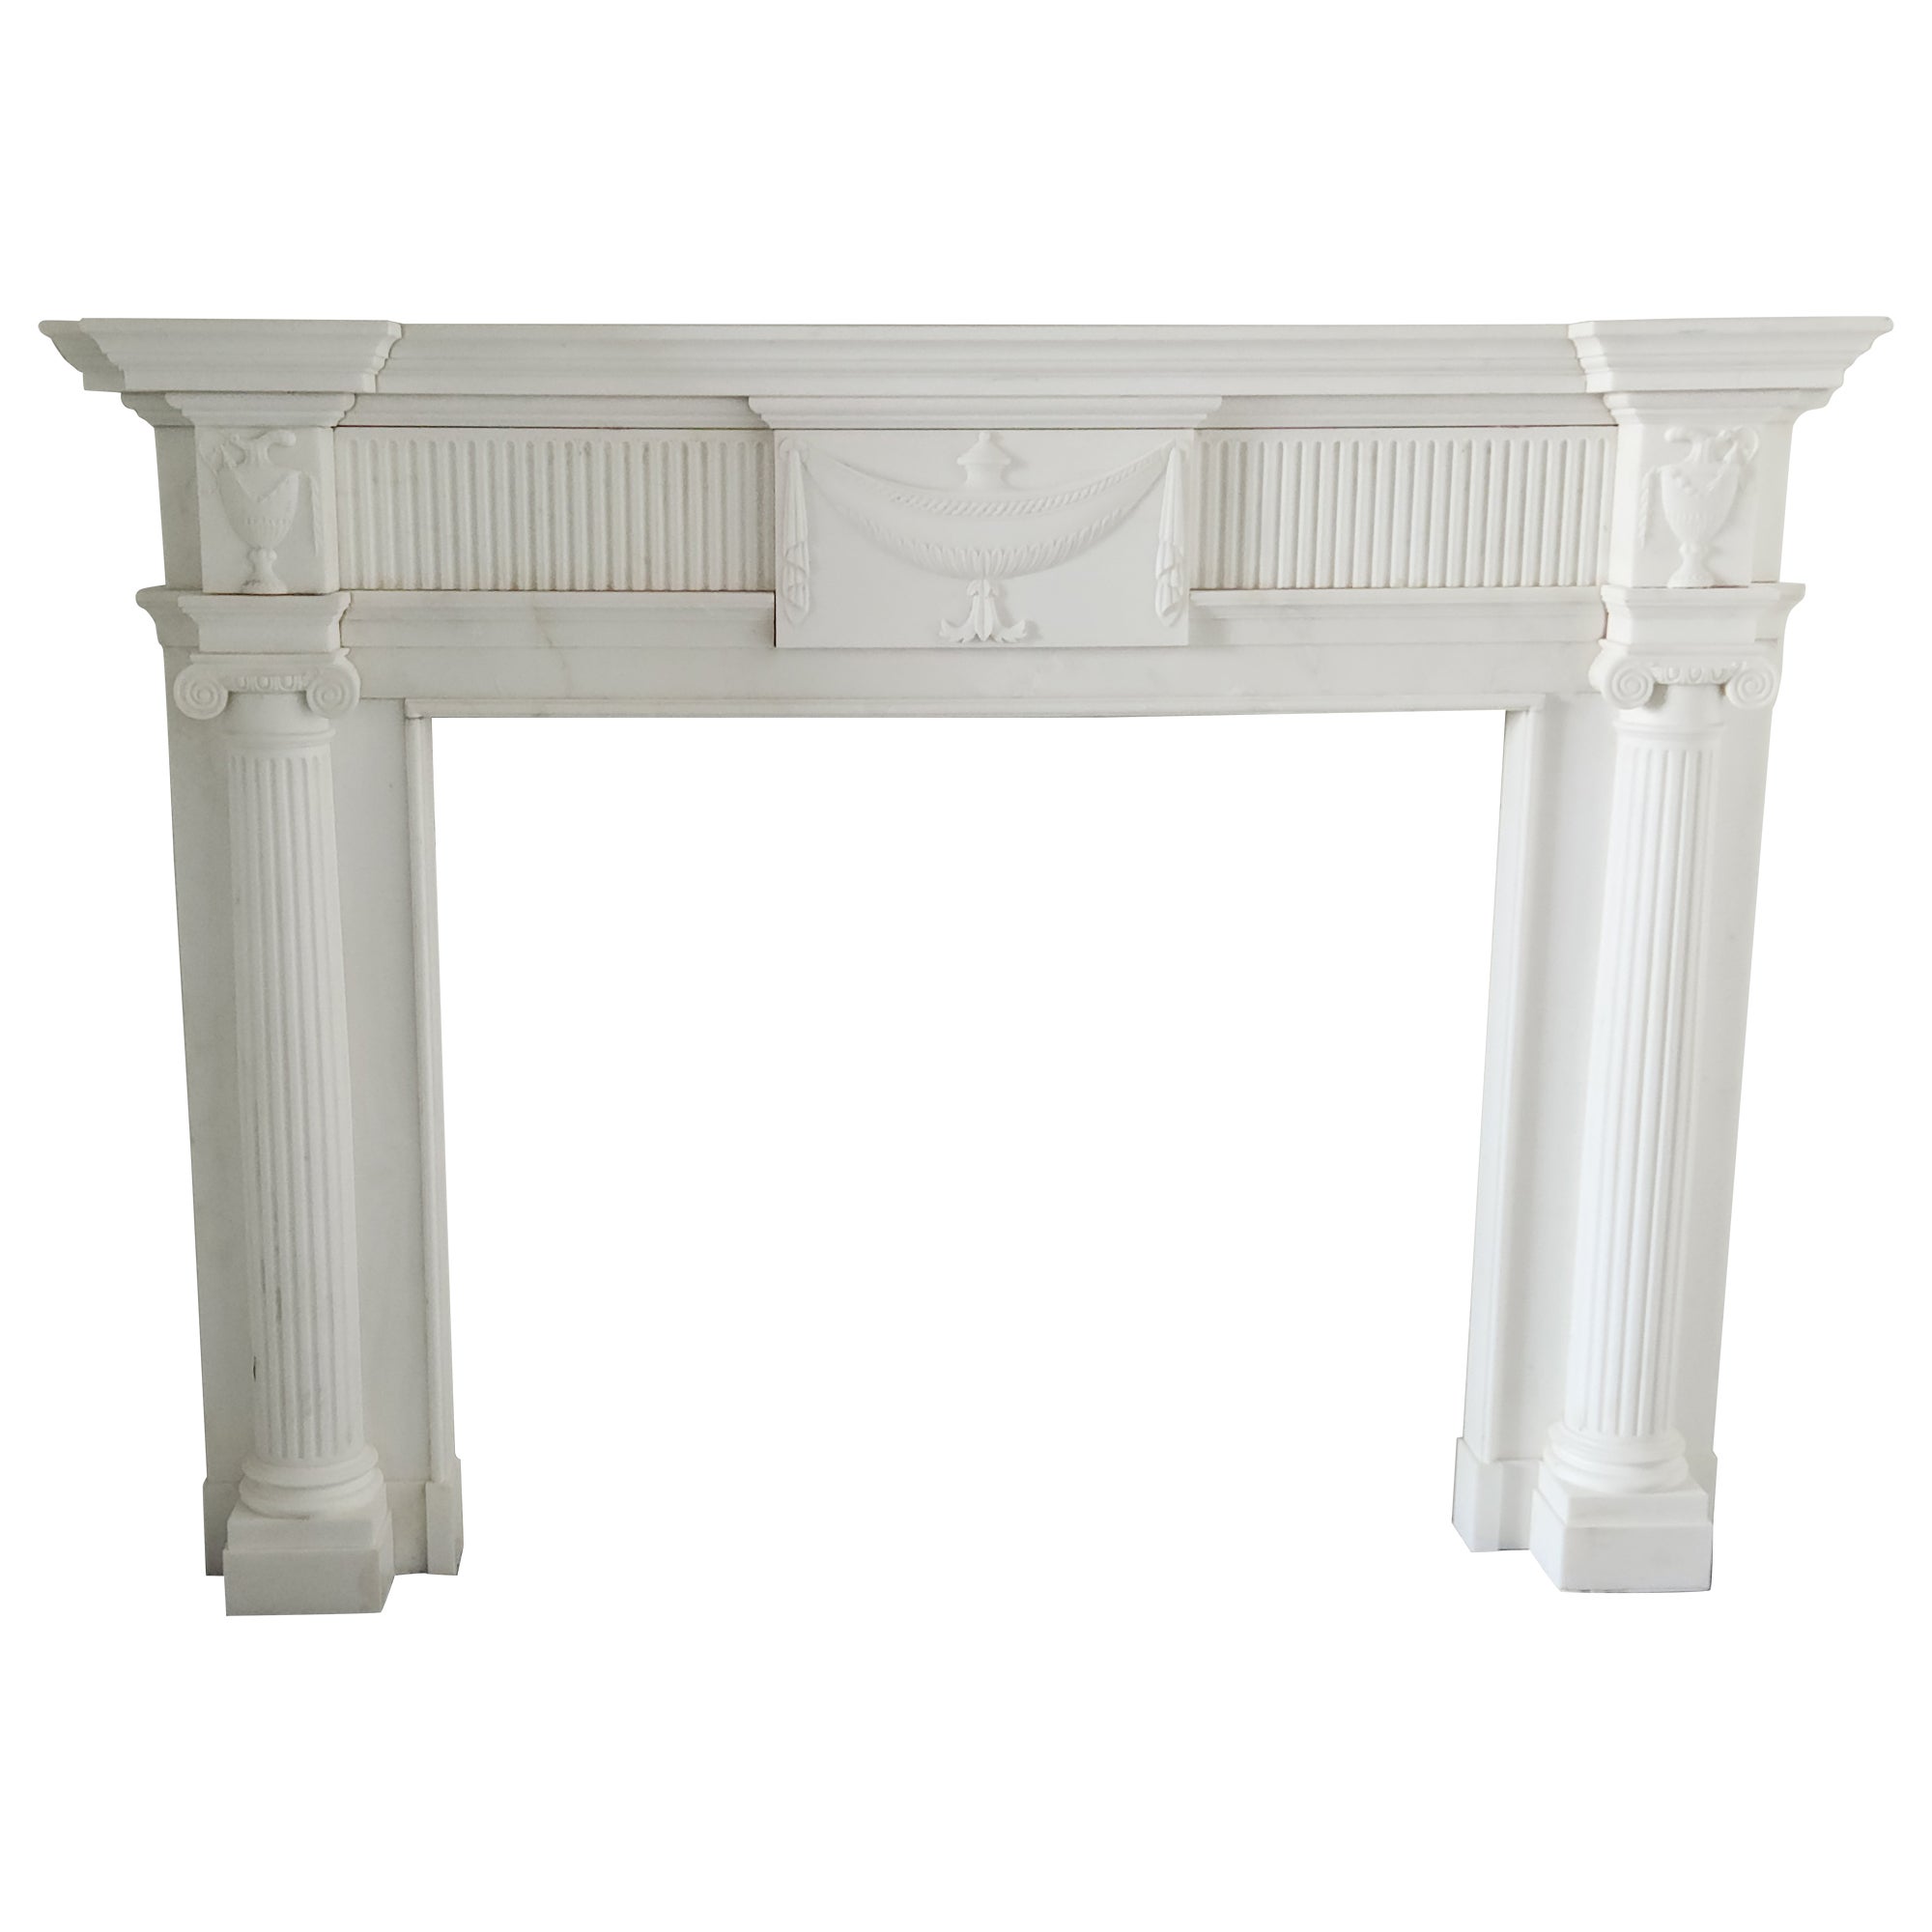 Hand-Carved White Marble Fireplace Mantel with Fluting in the Regency Style